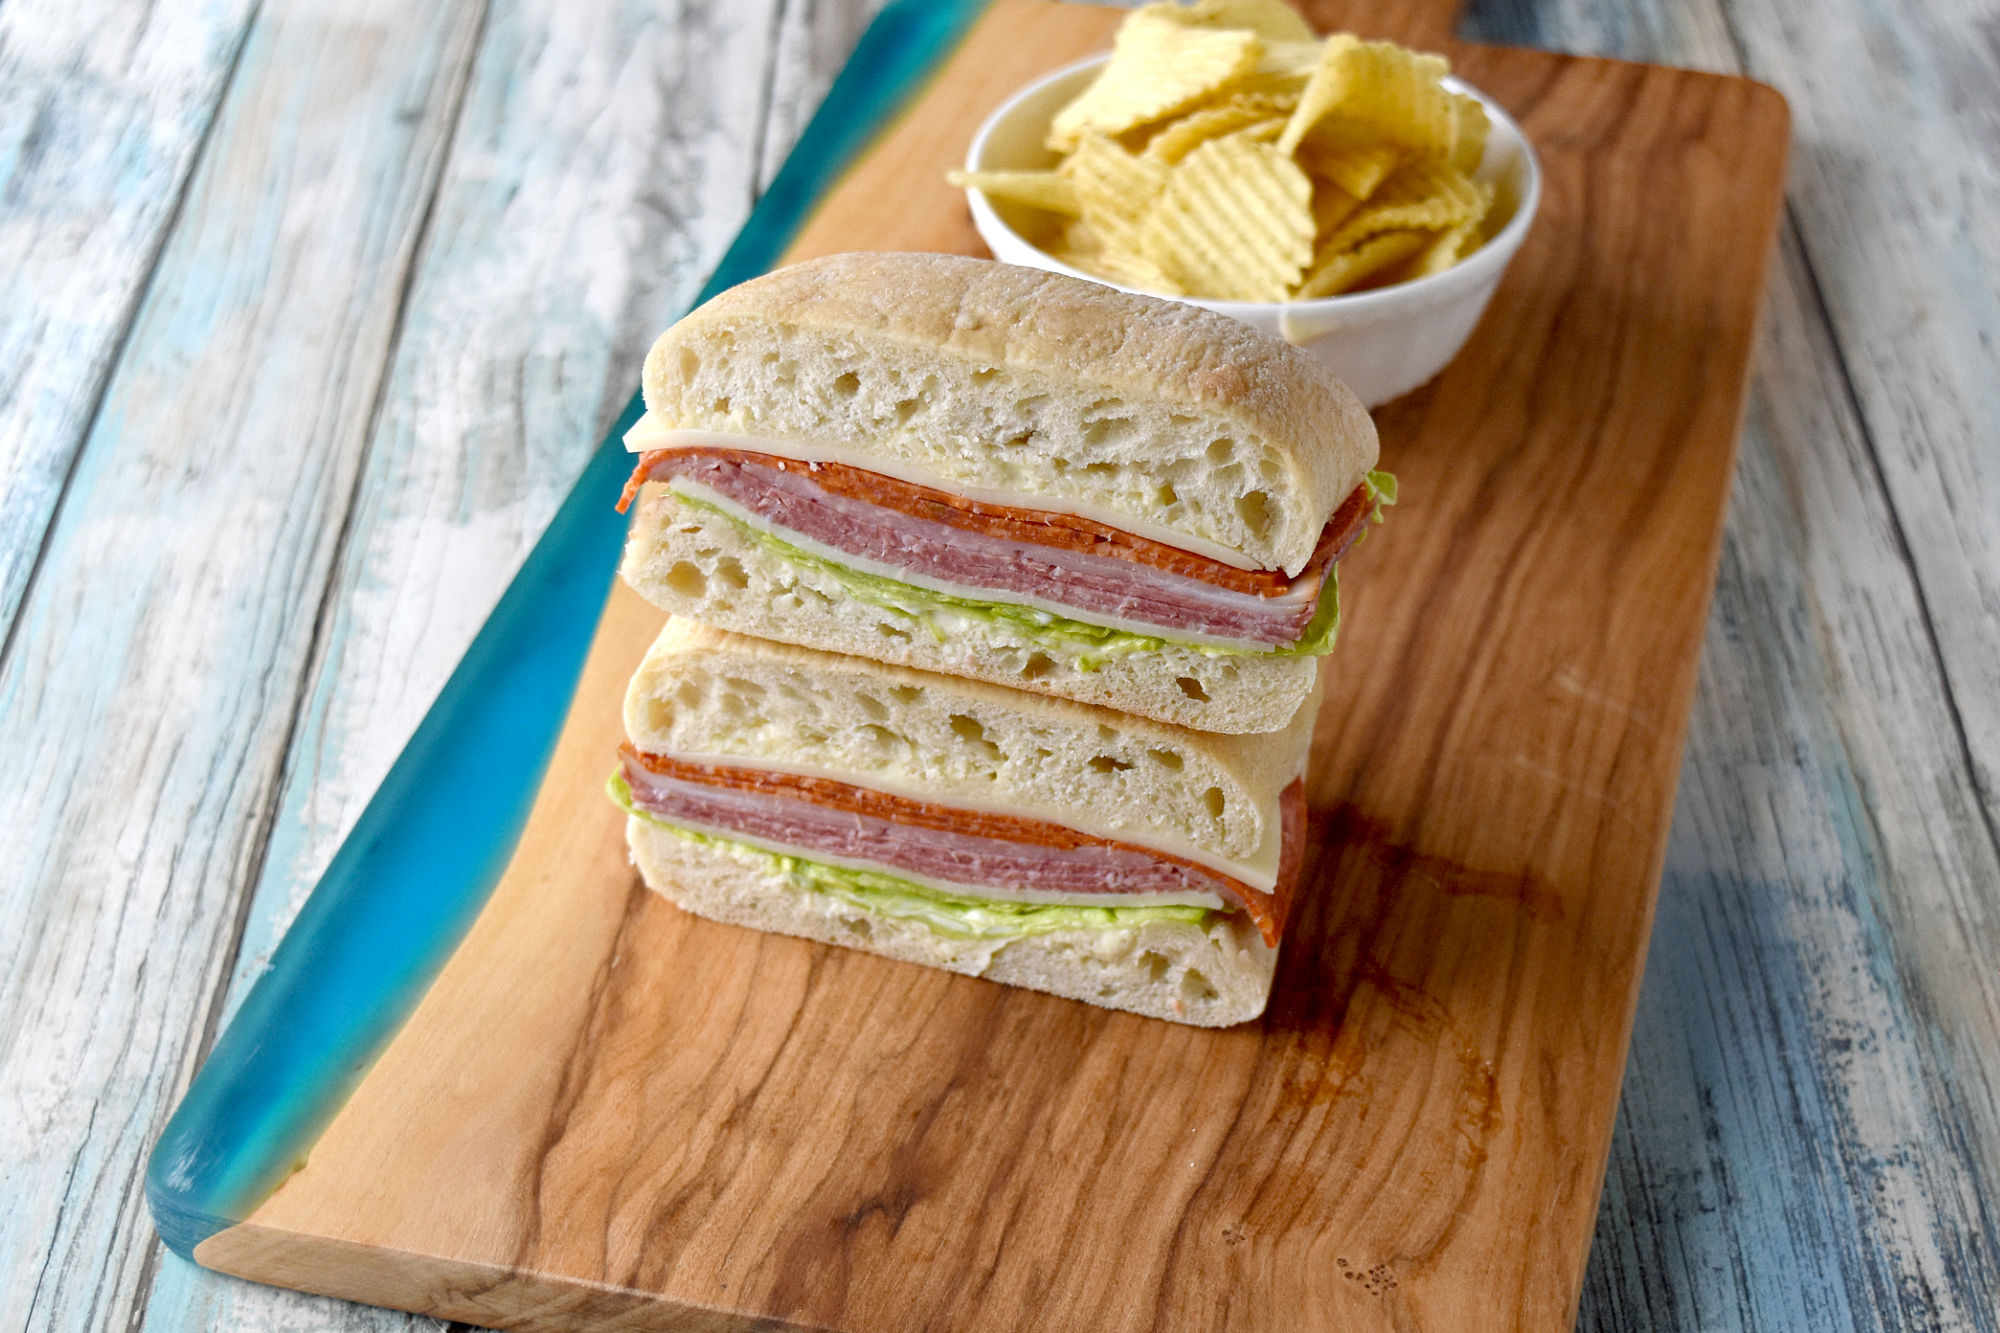 Pressed Picnic Sandwiches are fun to make, easily to customize, and not messy! They’re a fun make ahead recipe for any picnic or outdoor adventure.  #OurFamilyTable #pressedsandwich #sandwichrecipe #picnicsandwich #picnicbasket